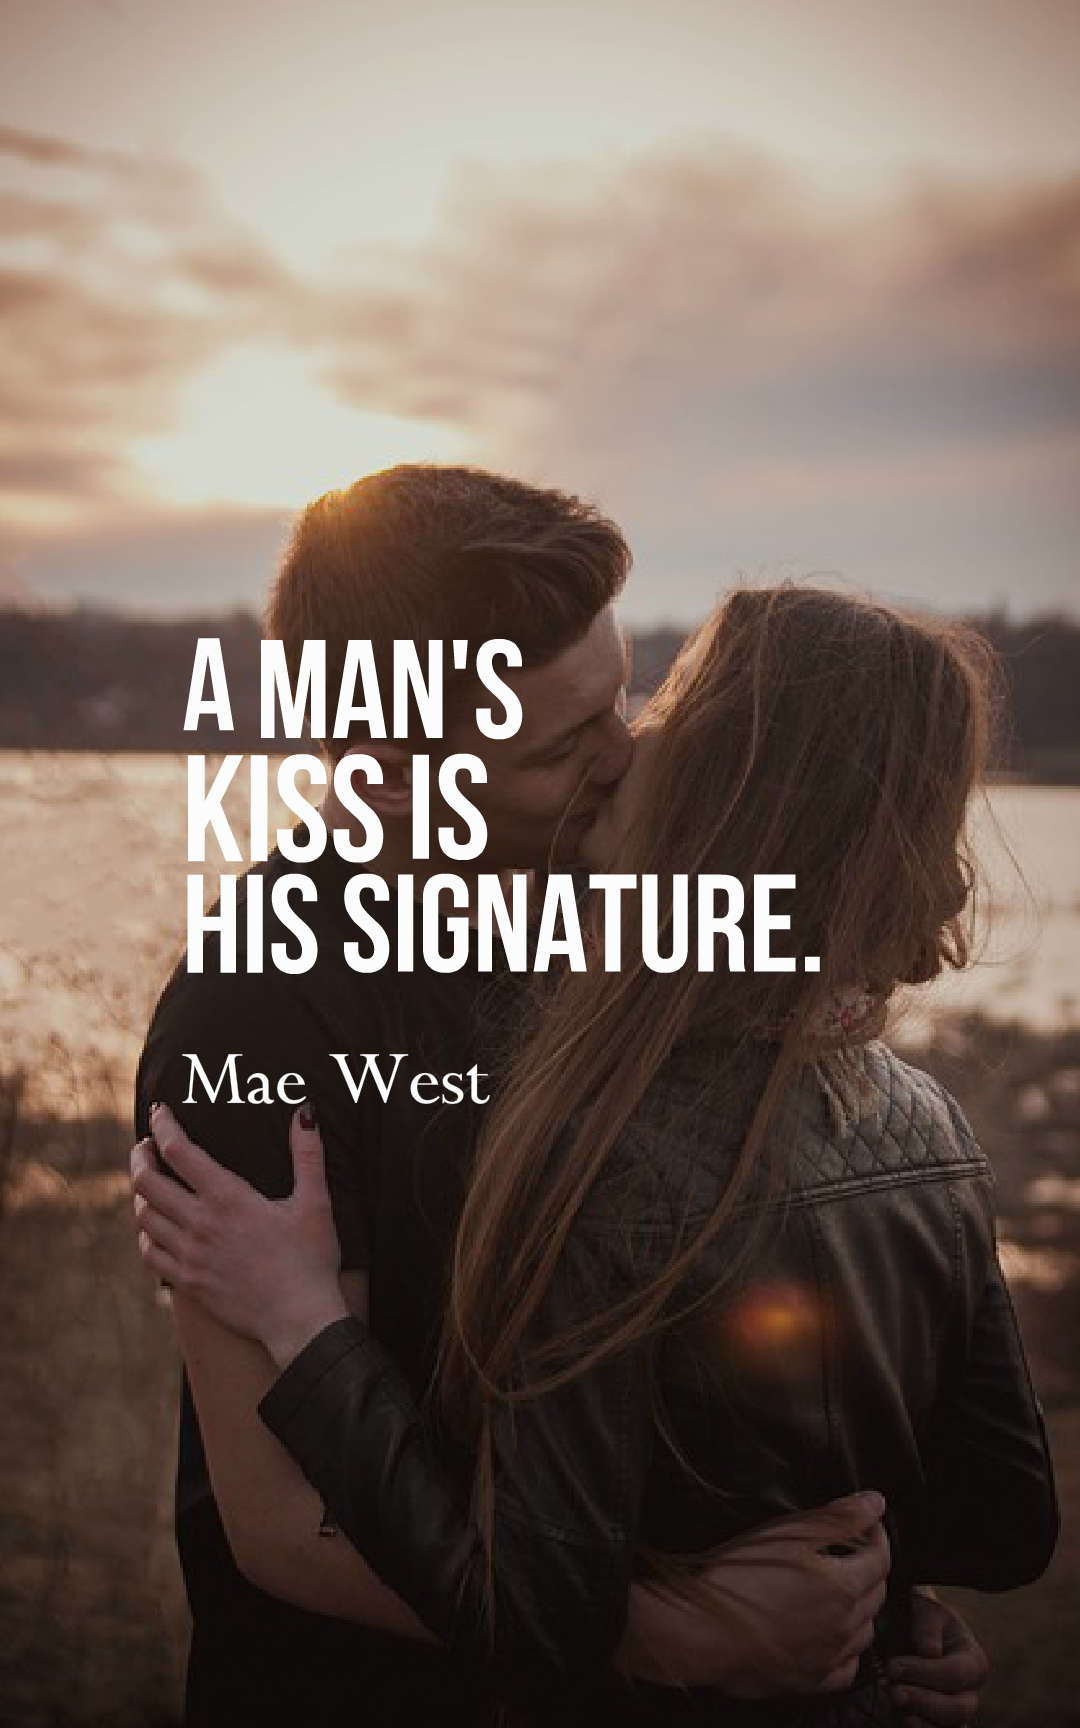 A man's kiss is his signature.